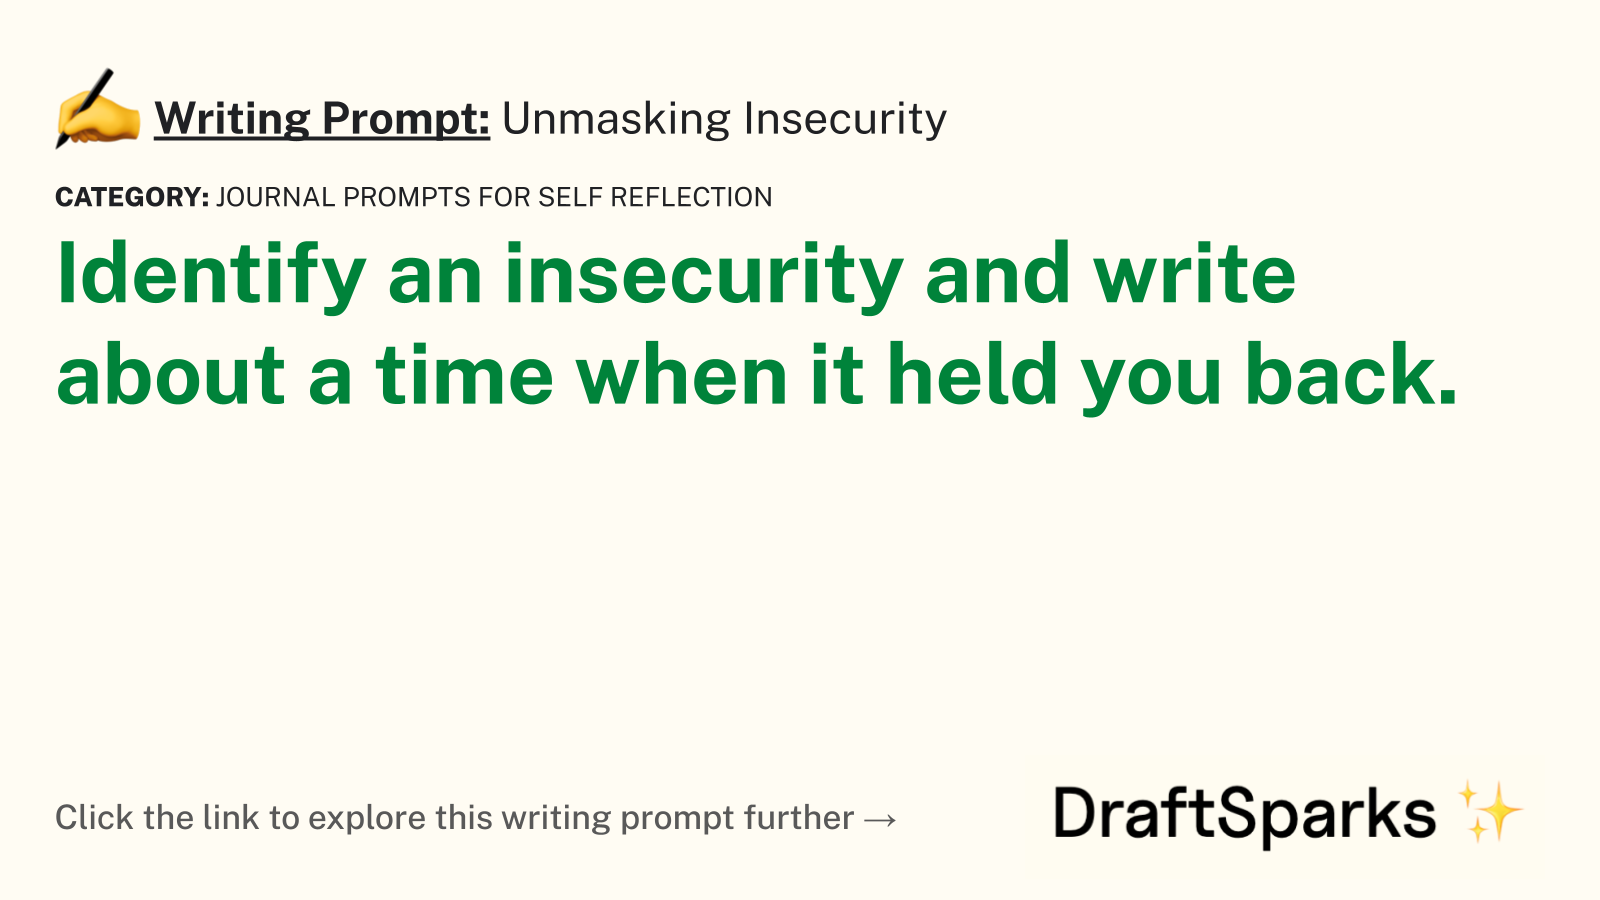 Unmasking Insecurity